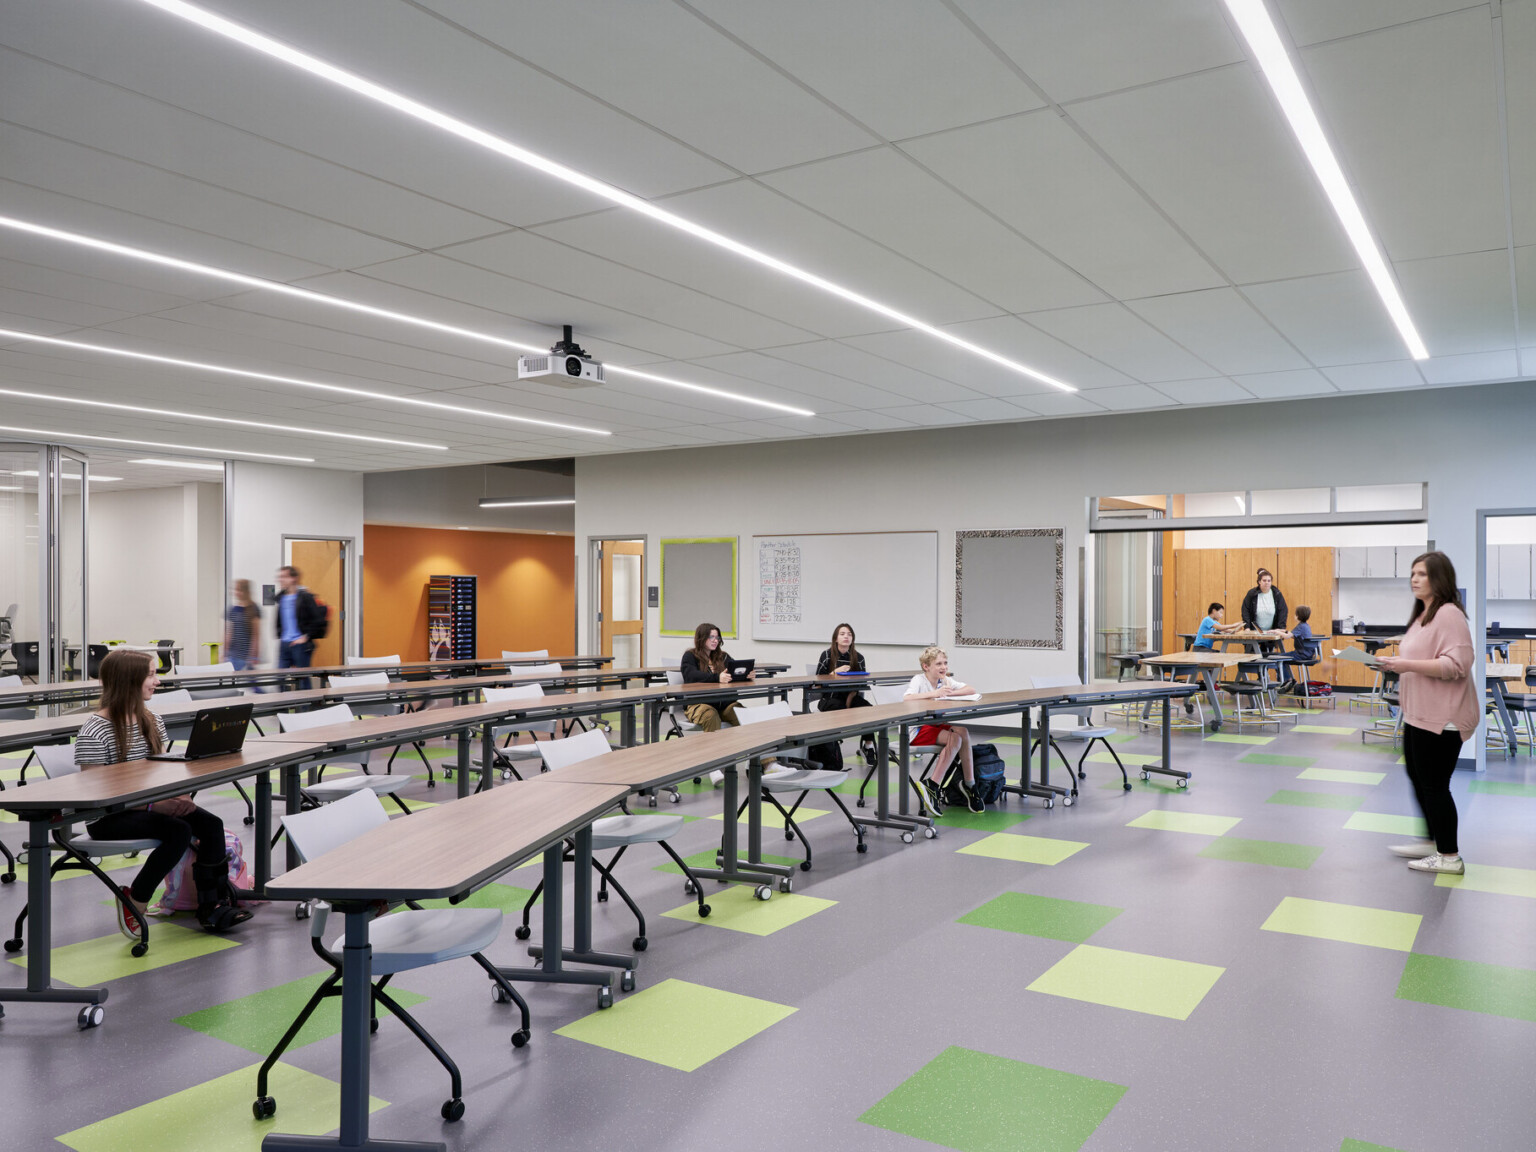 Classroom with green accent wall and floor tiles. Orange walls in hallway through flexible walls. Rolling chairs and long tables